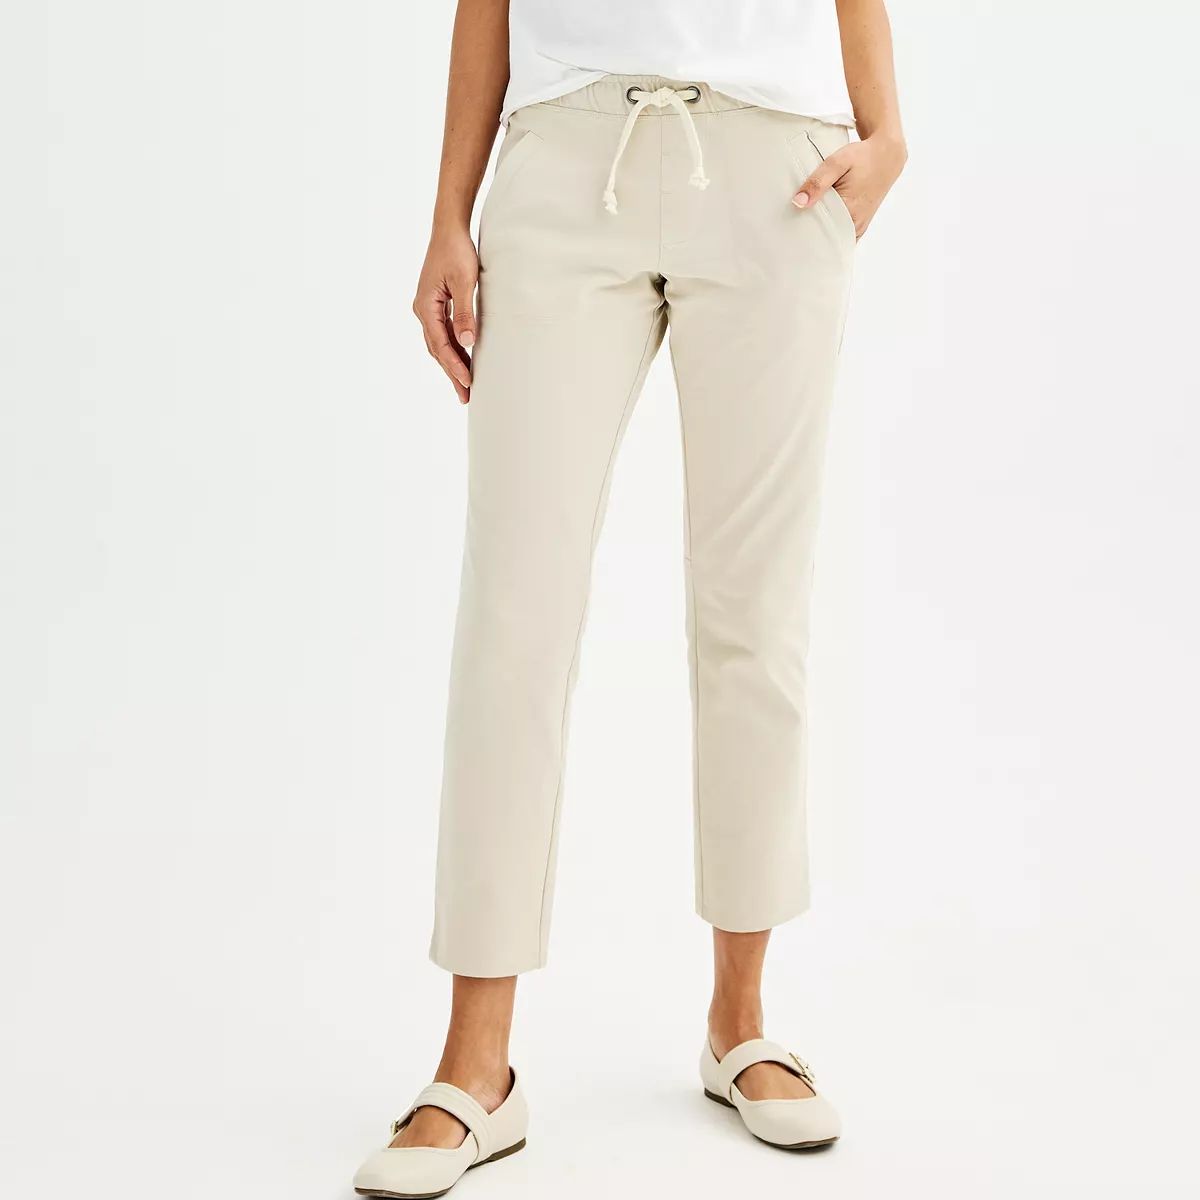 Women's Grey State Everyday Commuter Pants | Kohl's